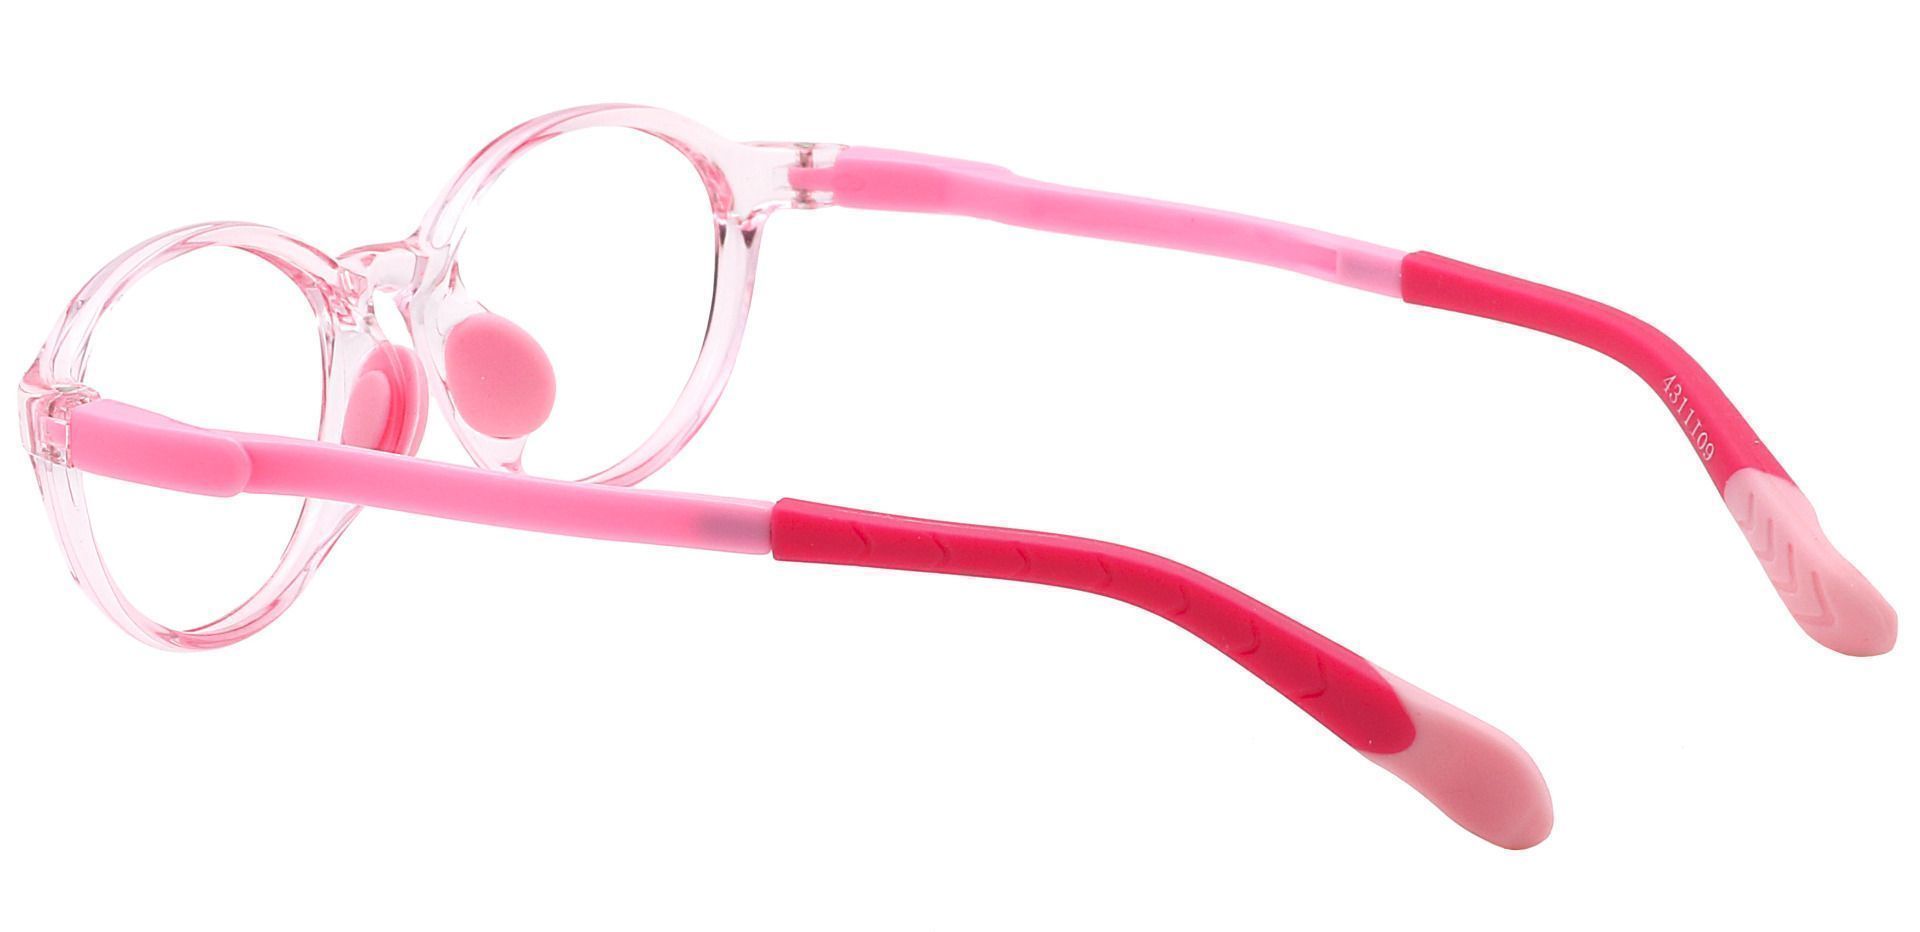 Axel Oval Non-Rx Glasses - Bubble Gum Pink Crystal